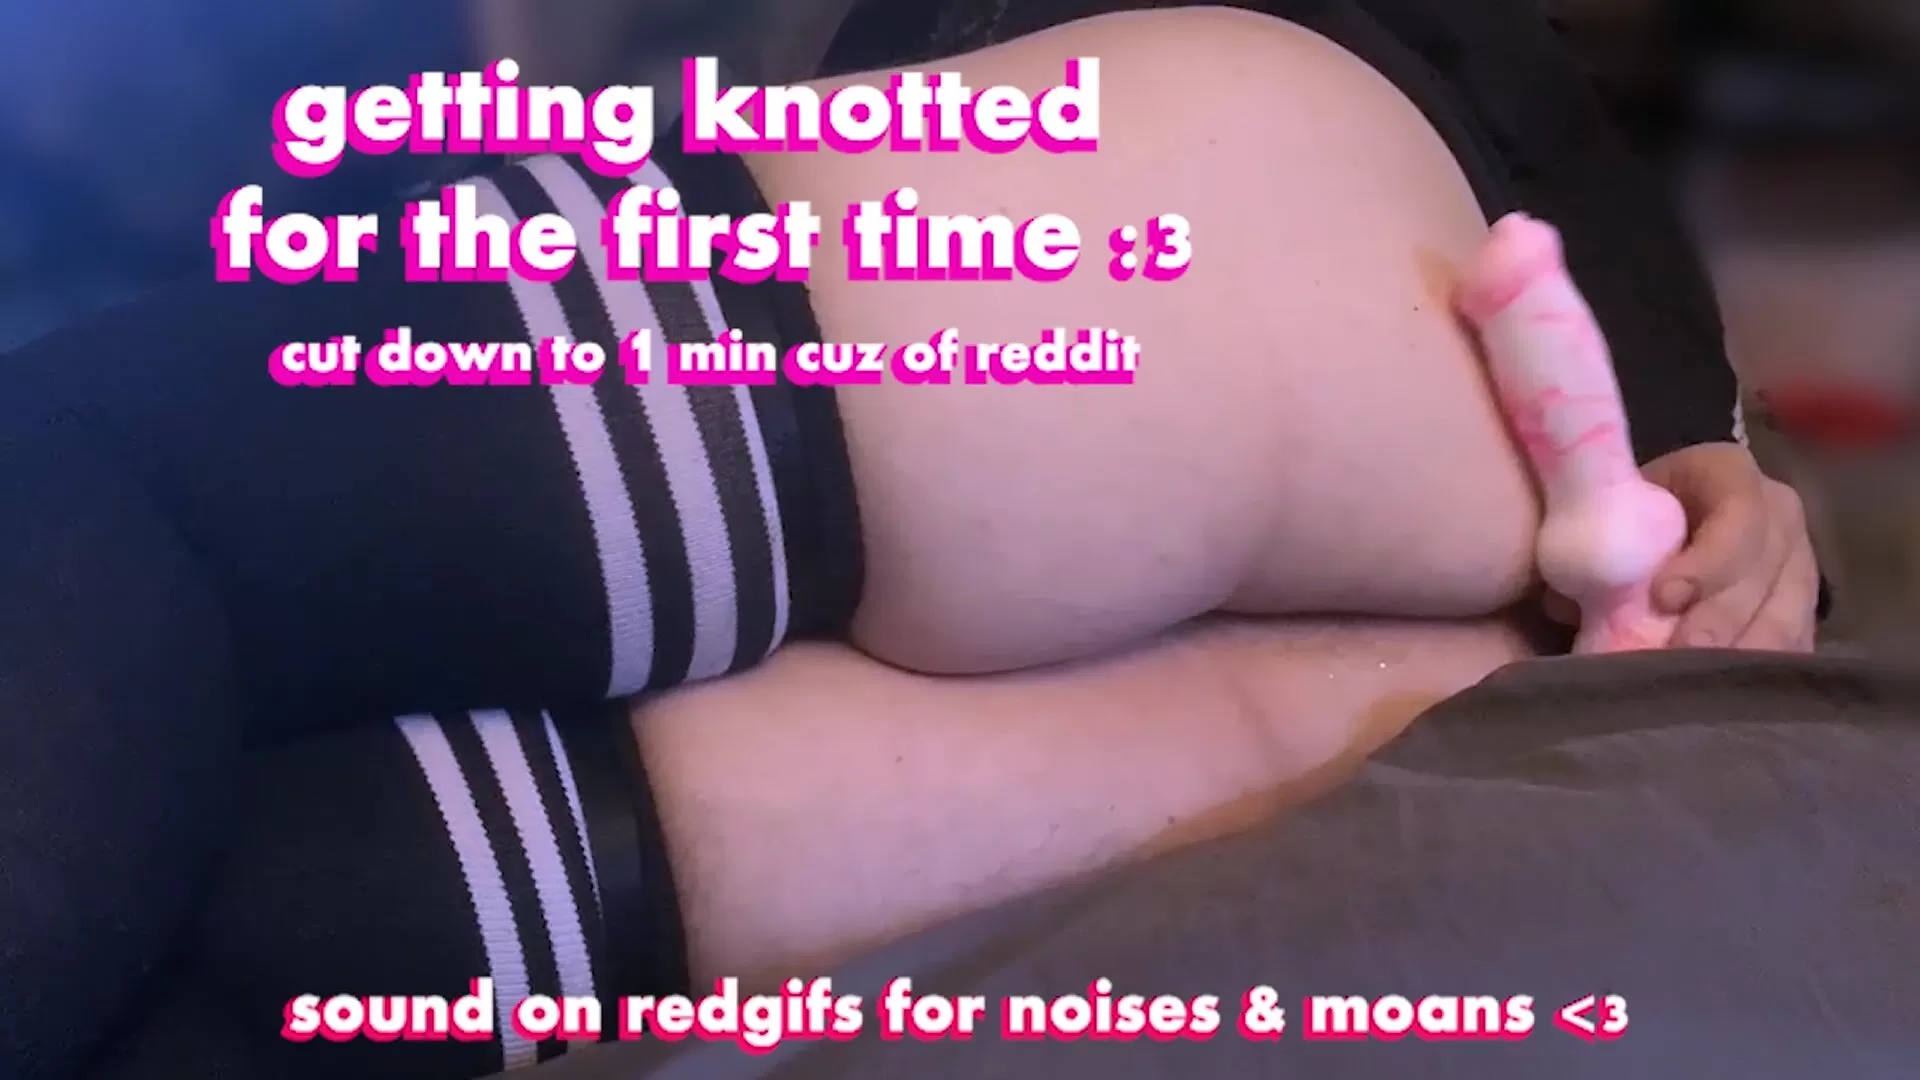 taking a knot for the first time til i cum >///< the stretch is mind blowing